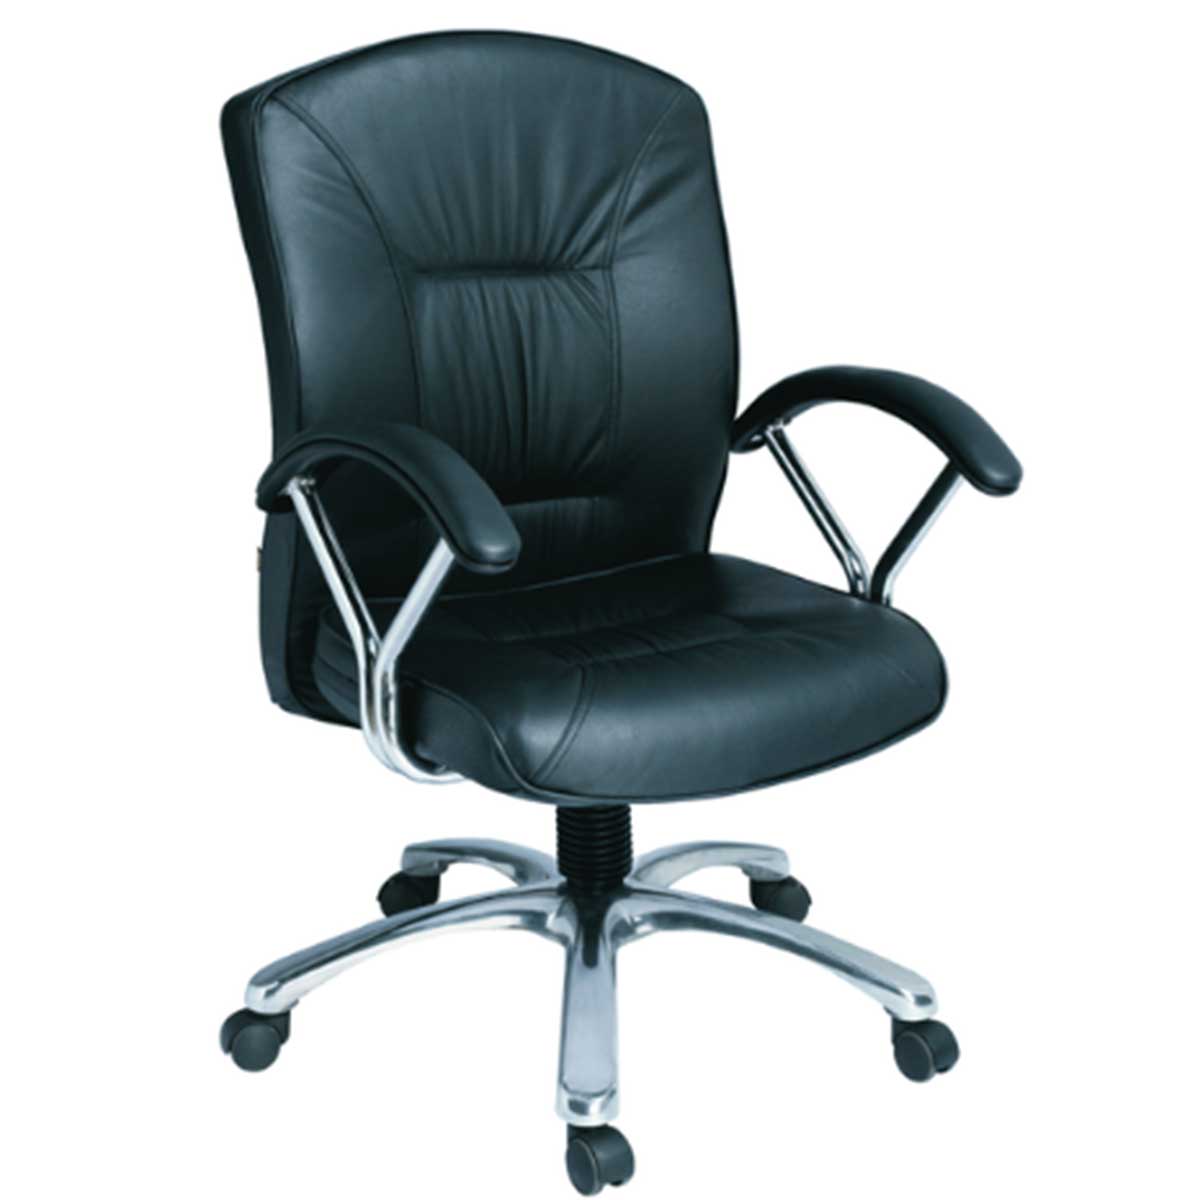 Godrej office chair Manufacturers, Suppliers in Mundka